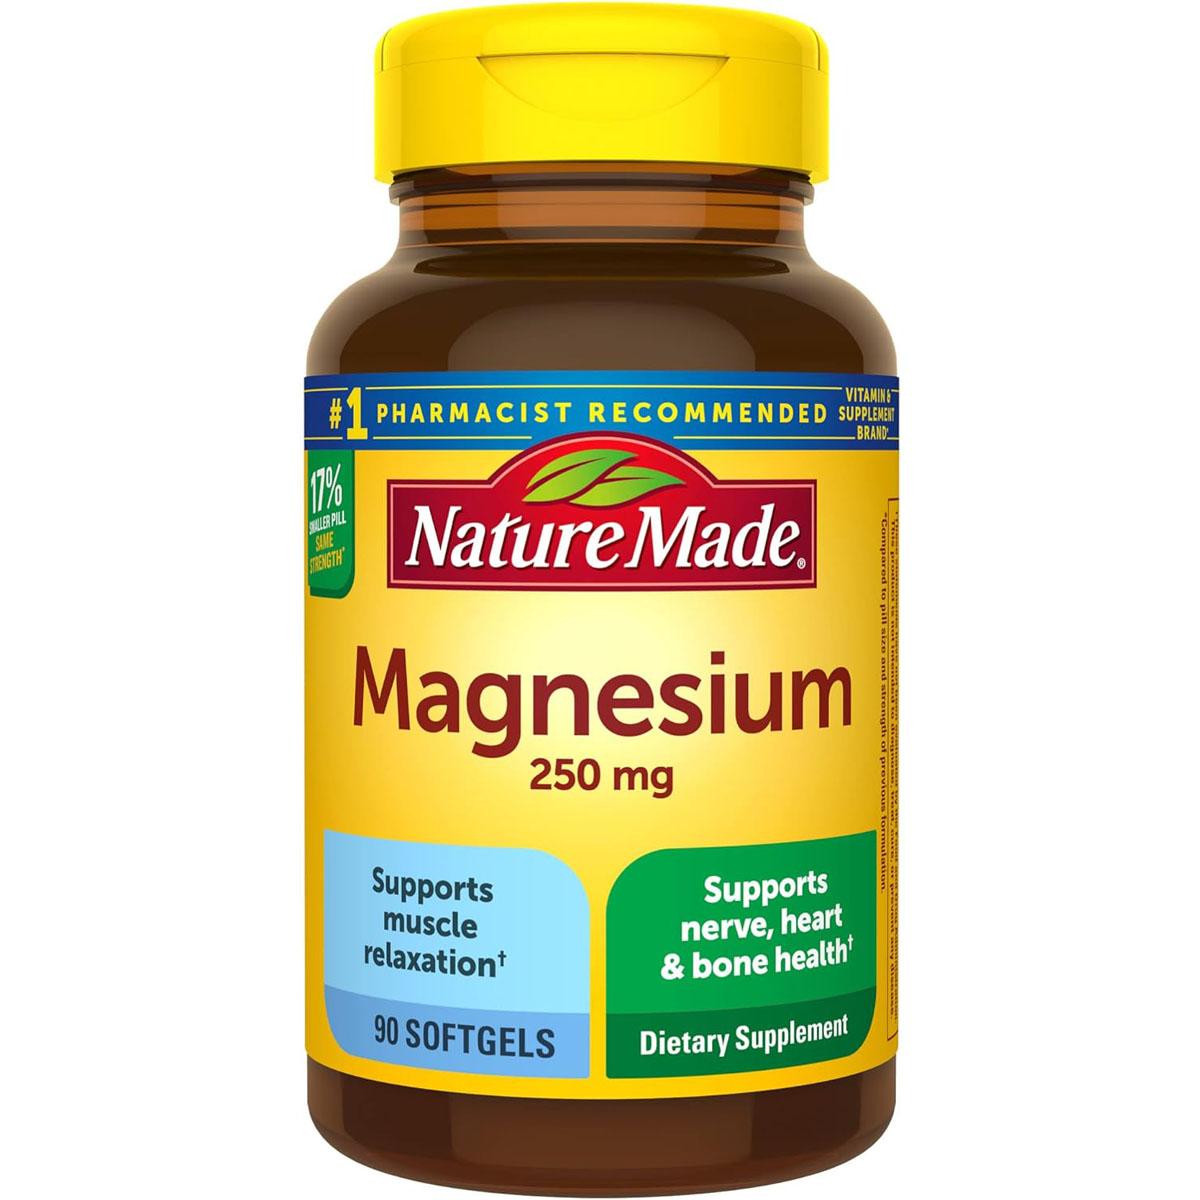 Nature Made Magnesium 250mg Softgels Dietary Supplements 2 Pack for $4.99 Shipped